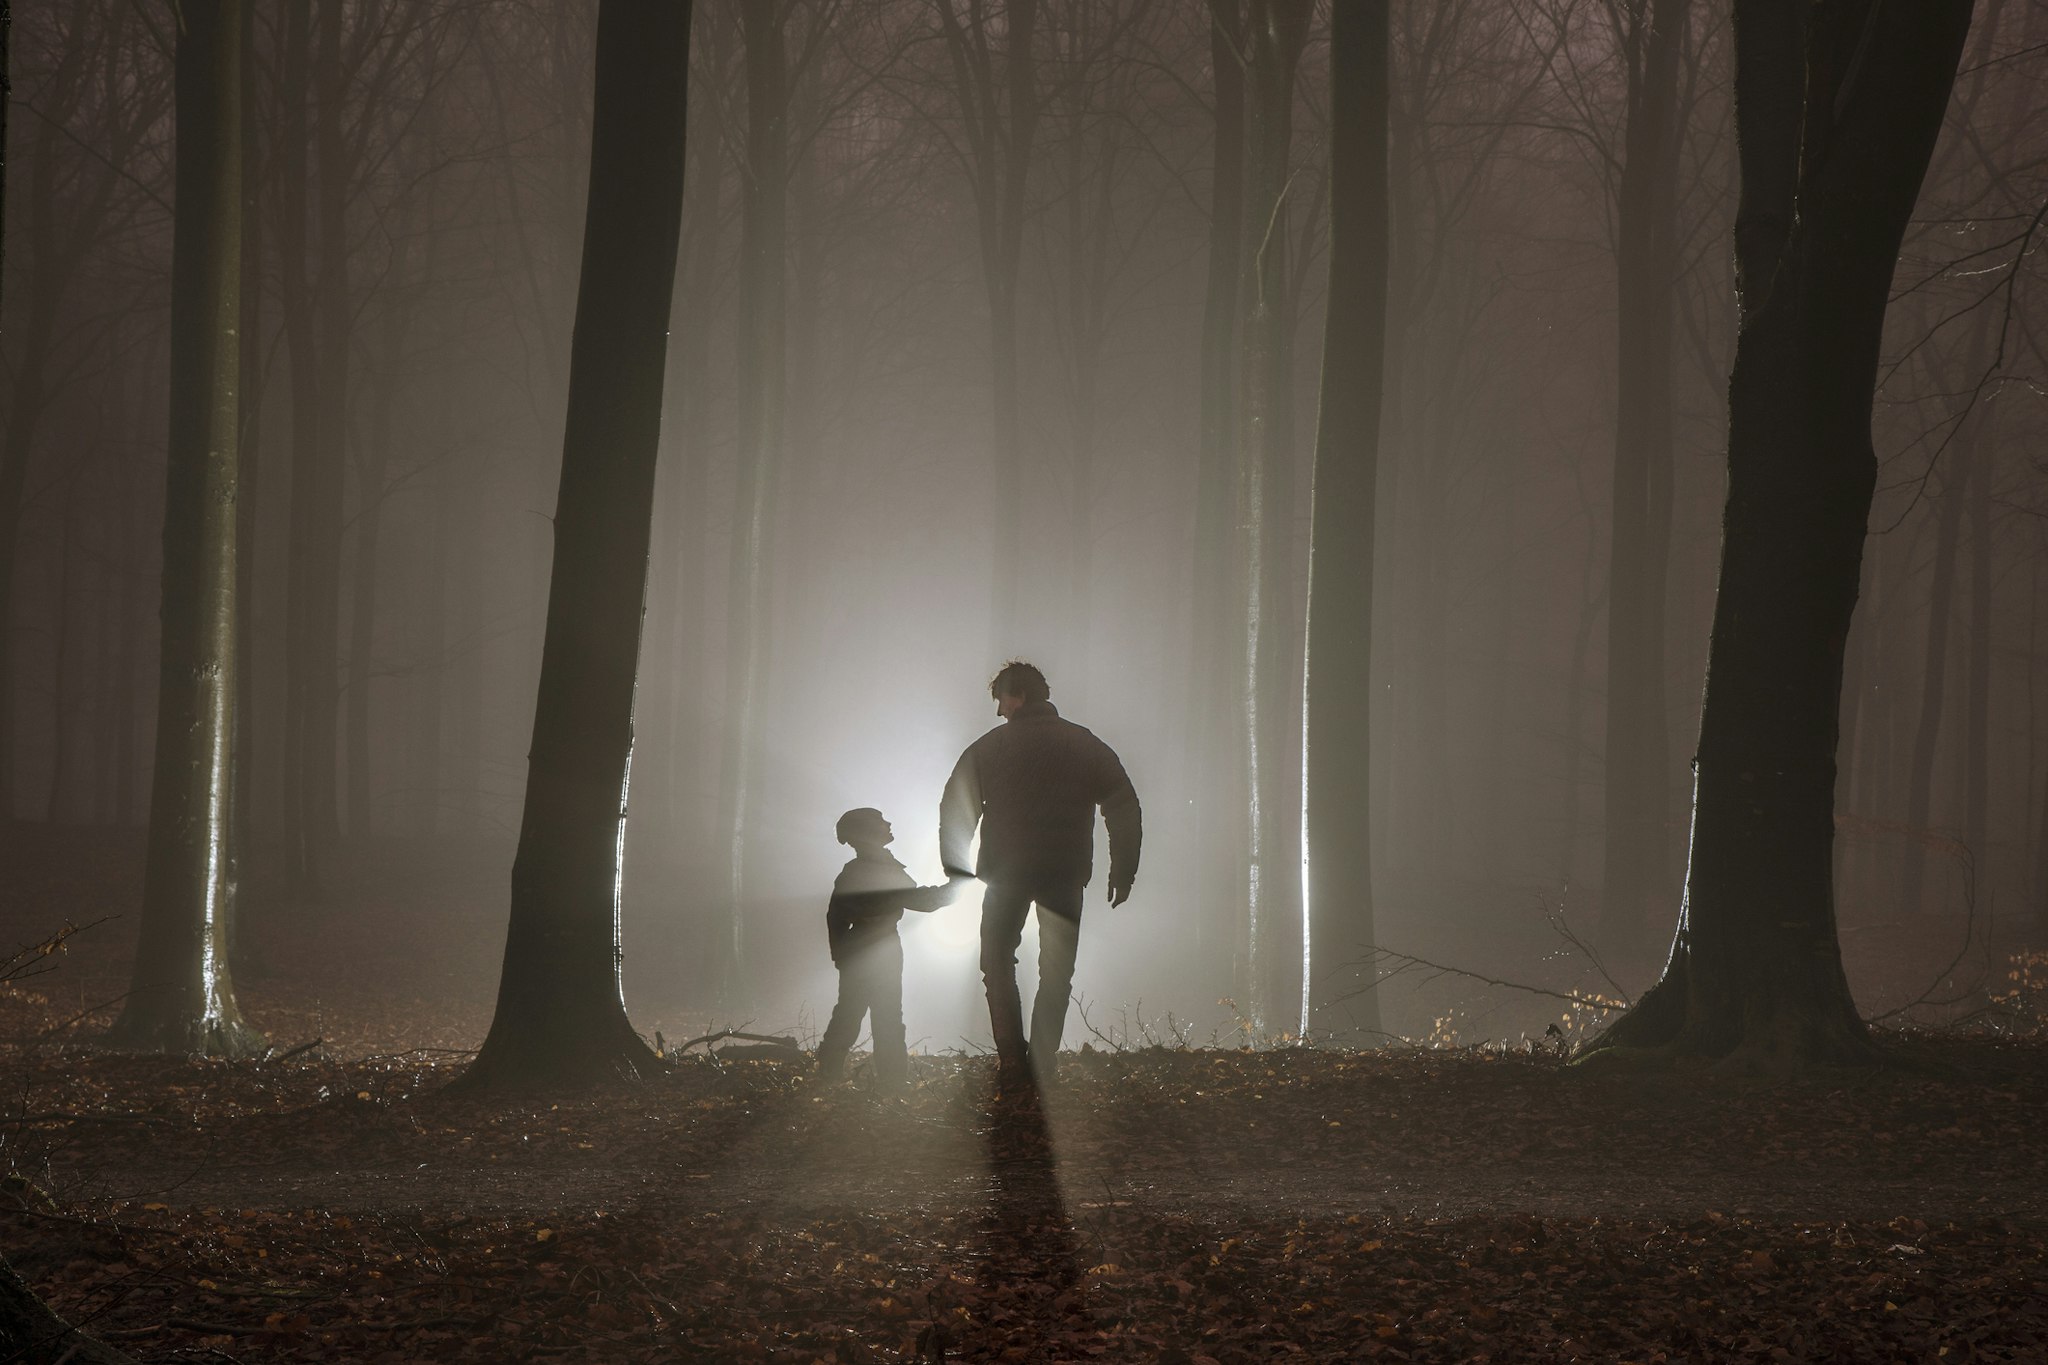 Father and son in misty forest - stock photo